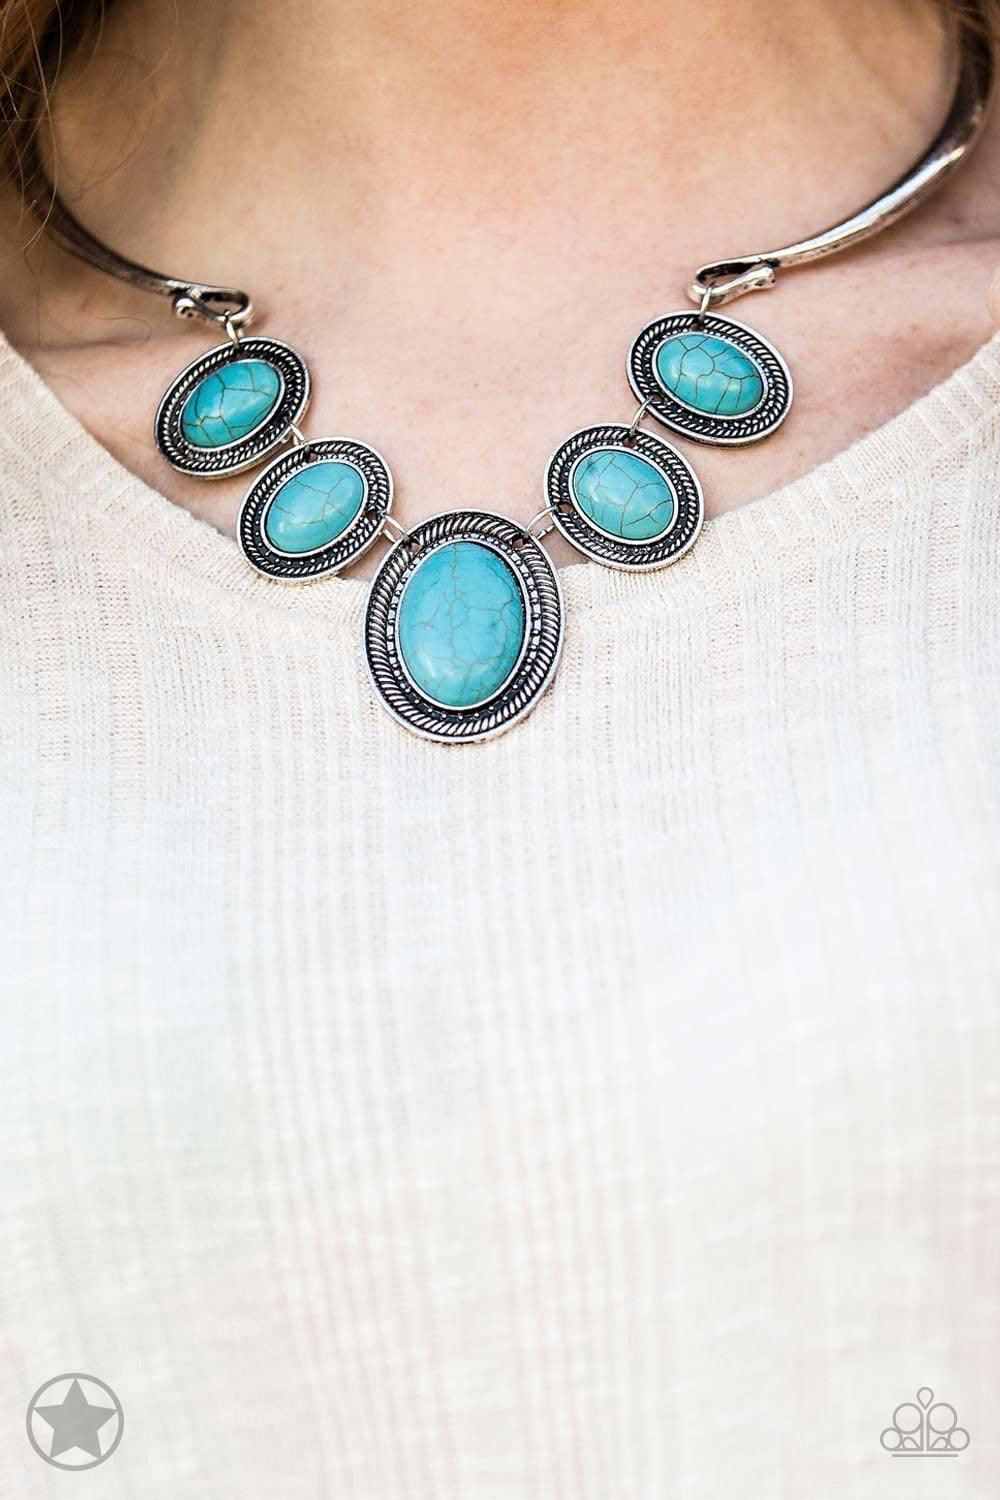 Paparazzi Accessories - Paparazzi Blockbuster Necklace: River Ride Blue - Bling by JessieK